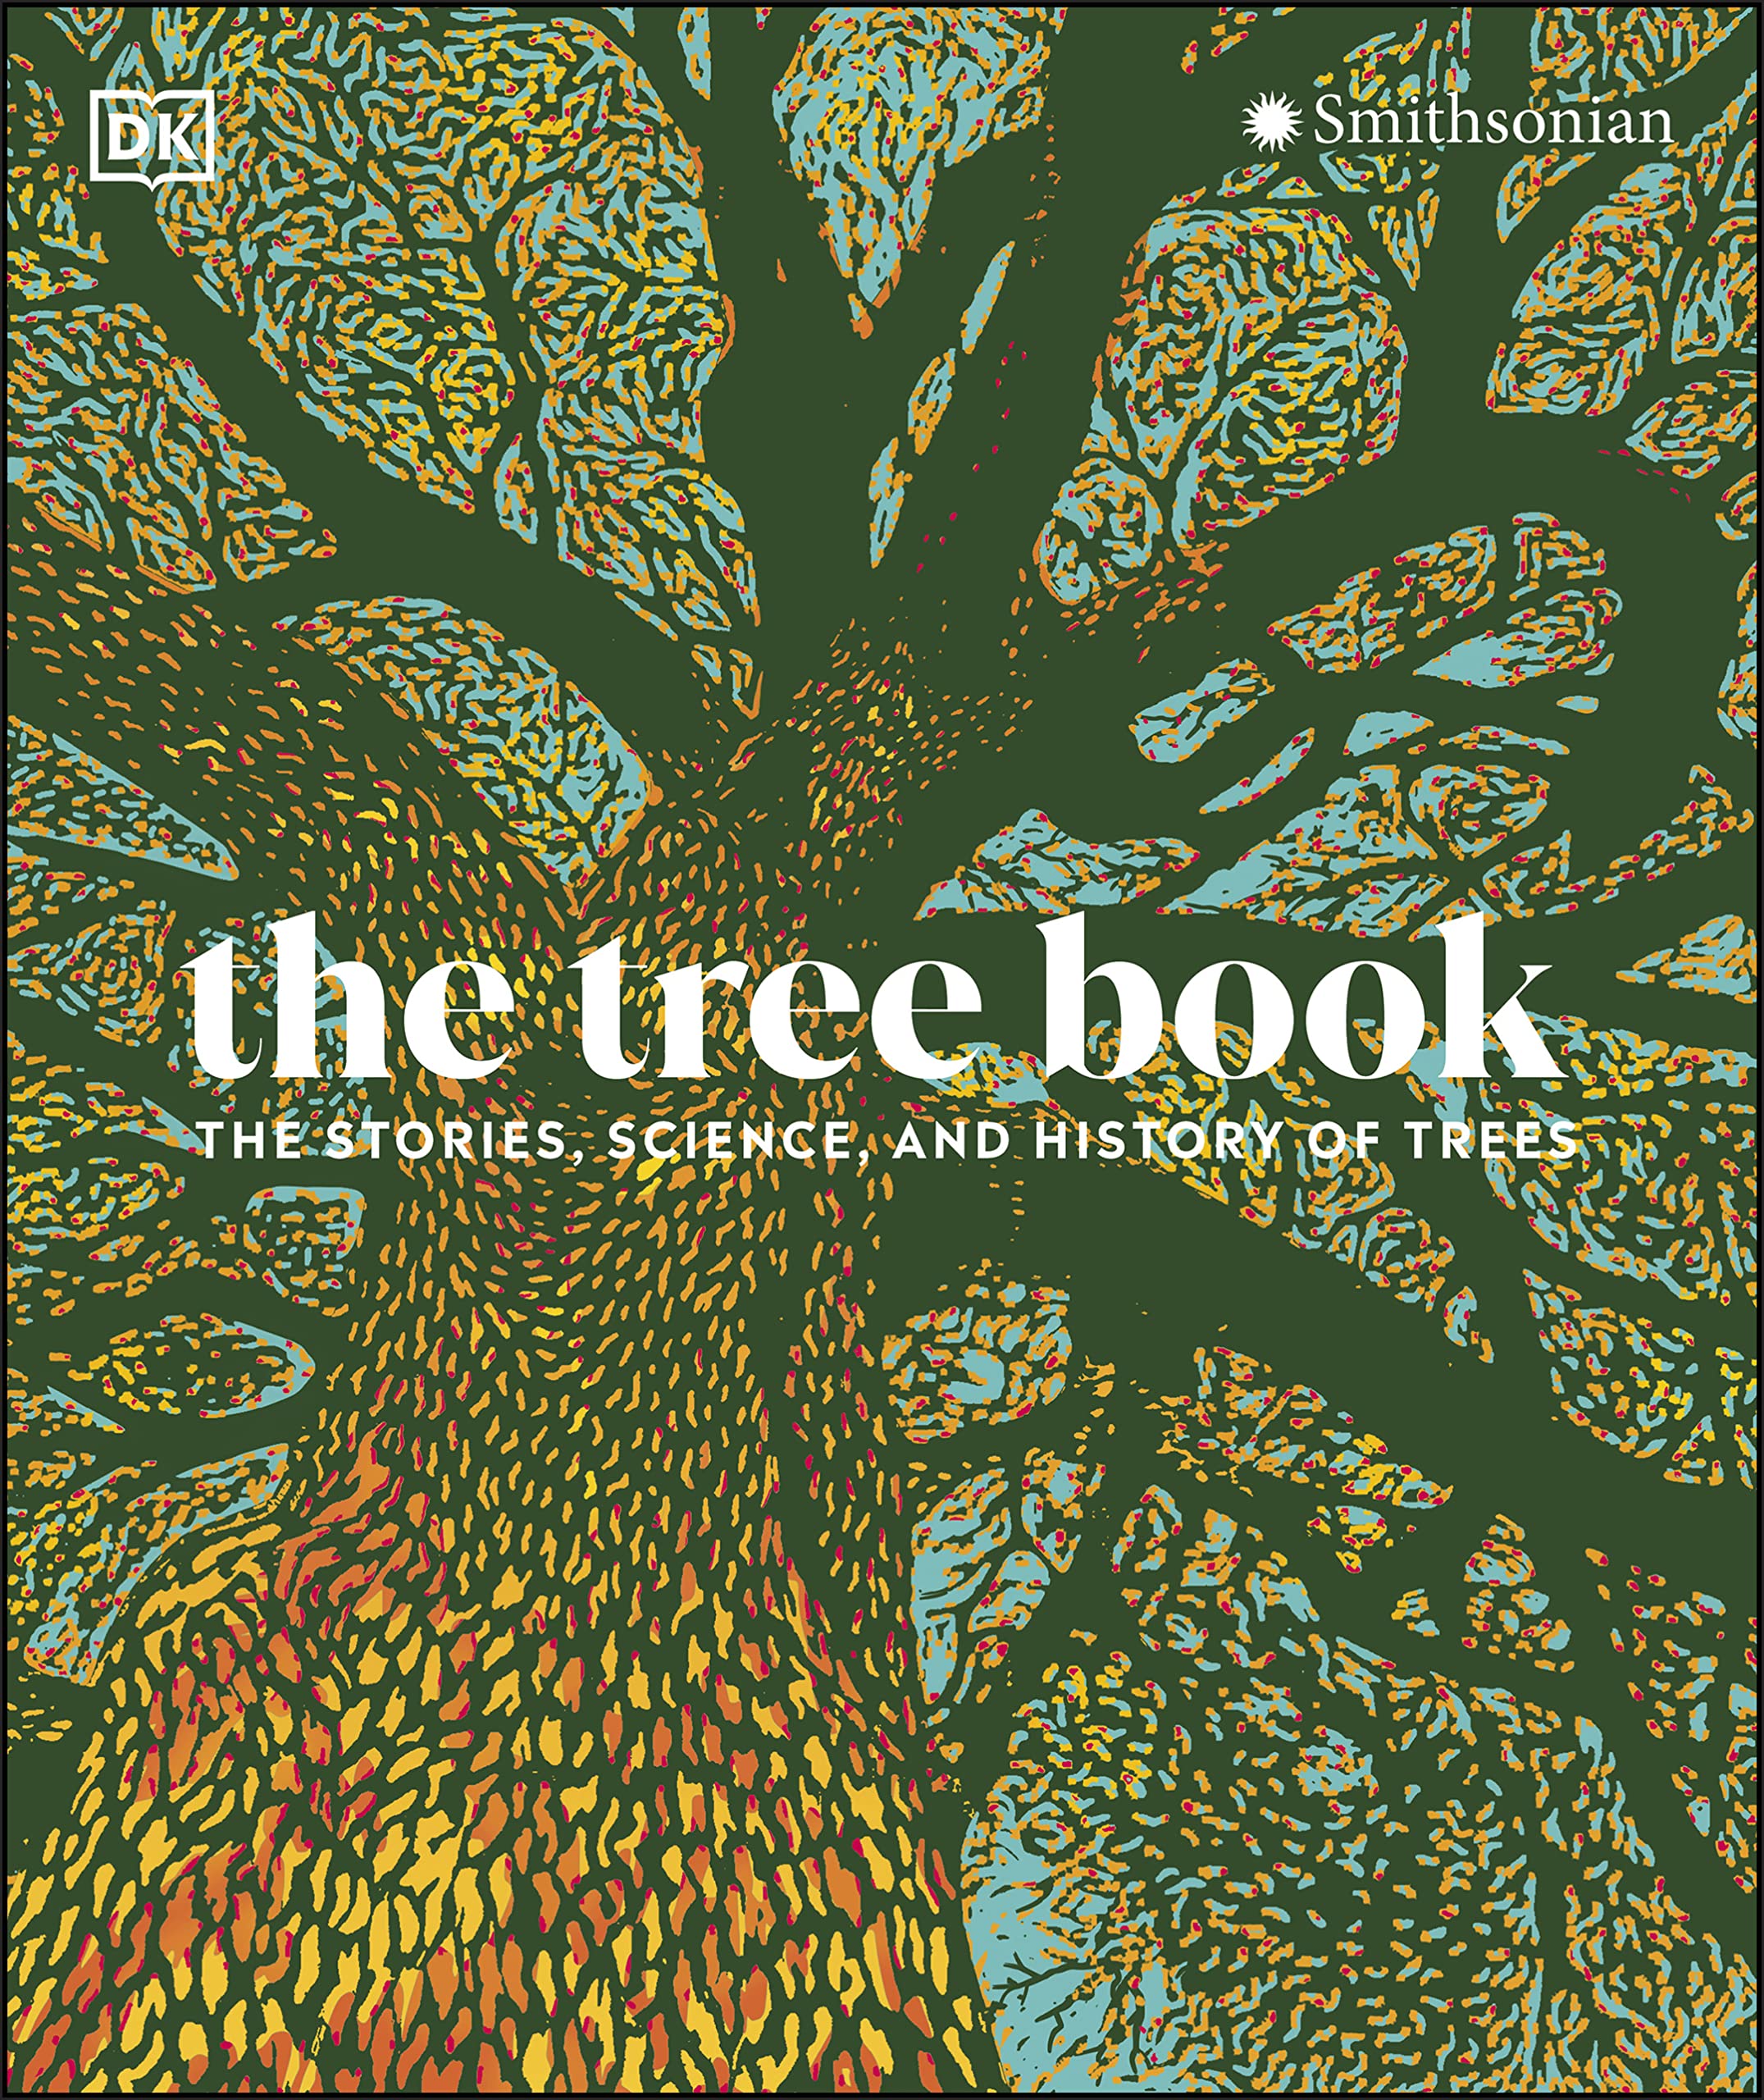 The Tree Book: The Stories, Science, and History of Trees (eBook) by DK $1.99